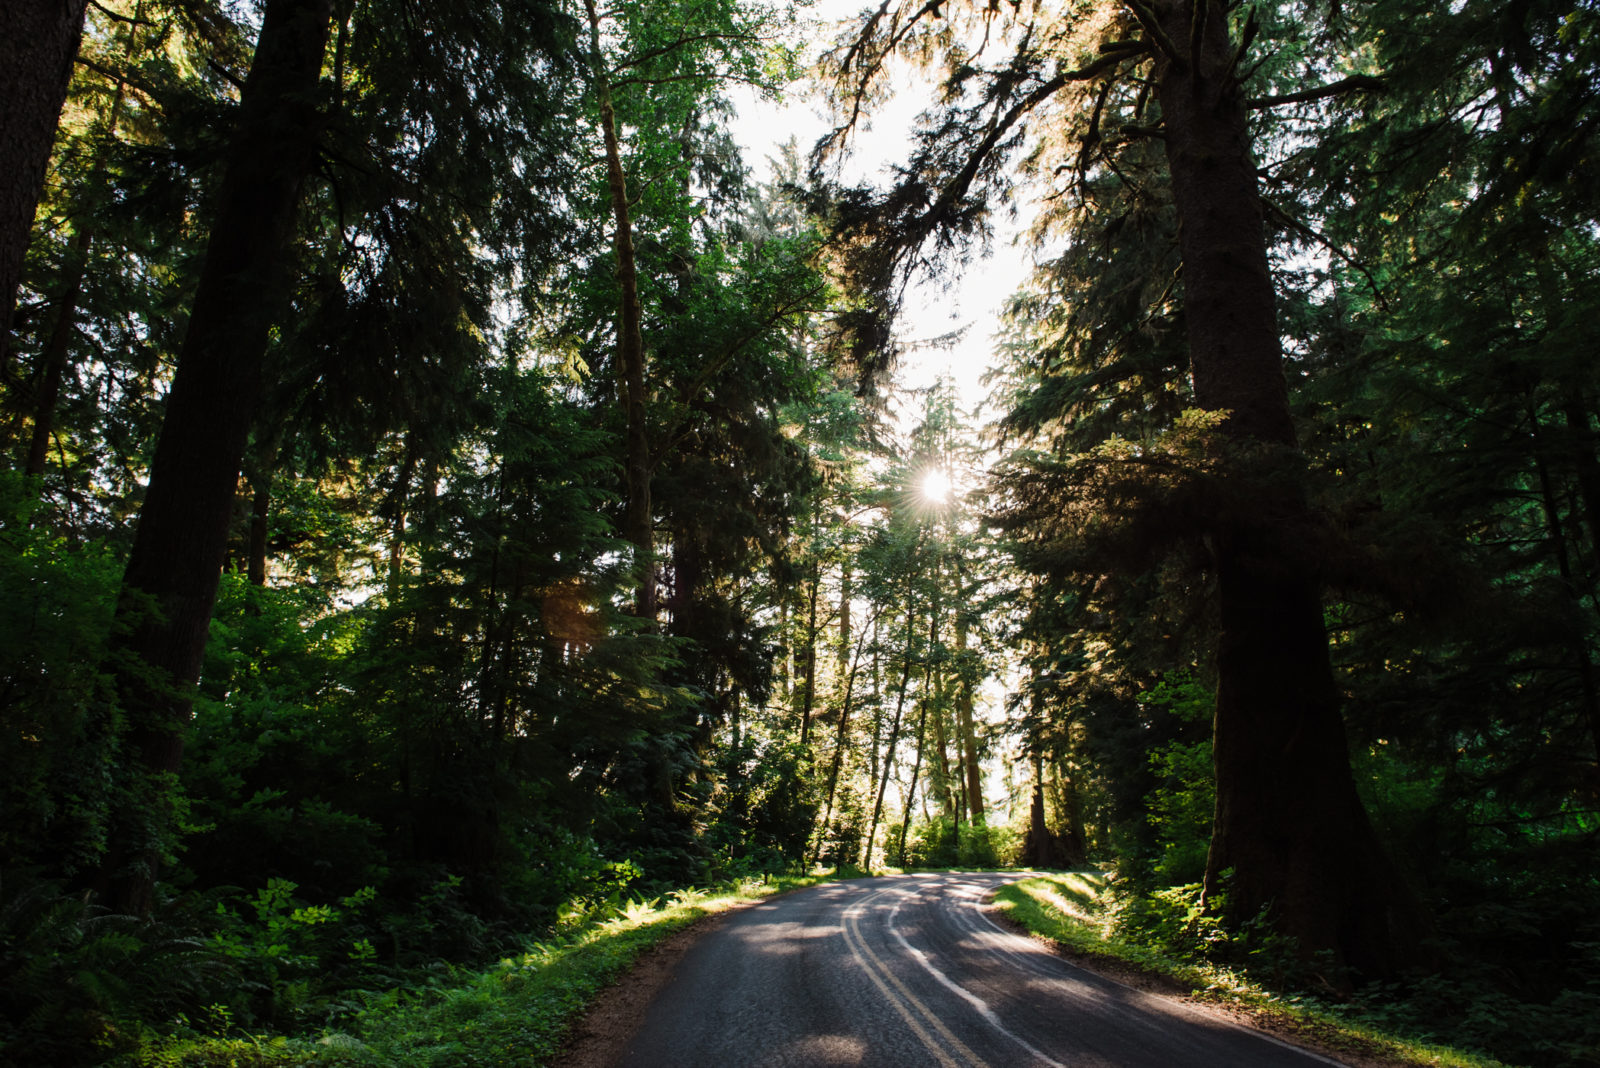 The road from the olympic national park campground that leads to Rialto beach, an olympic national park elopement location